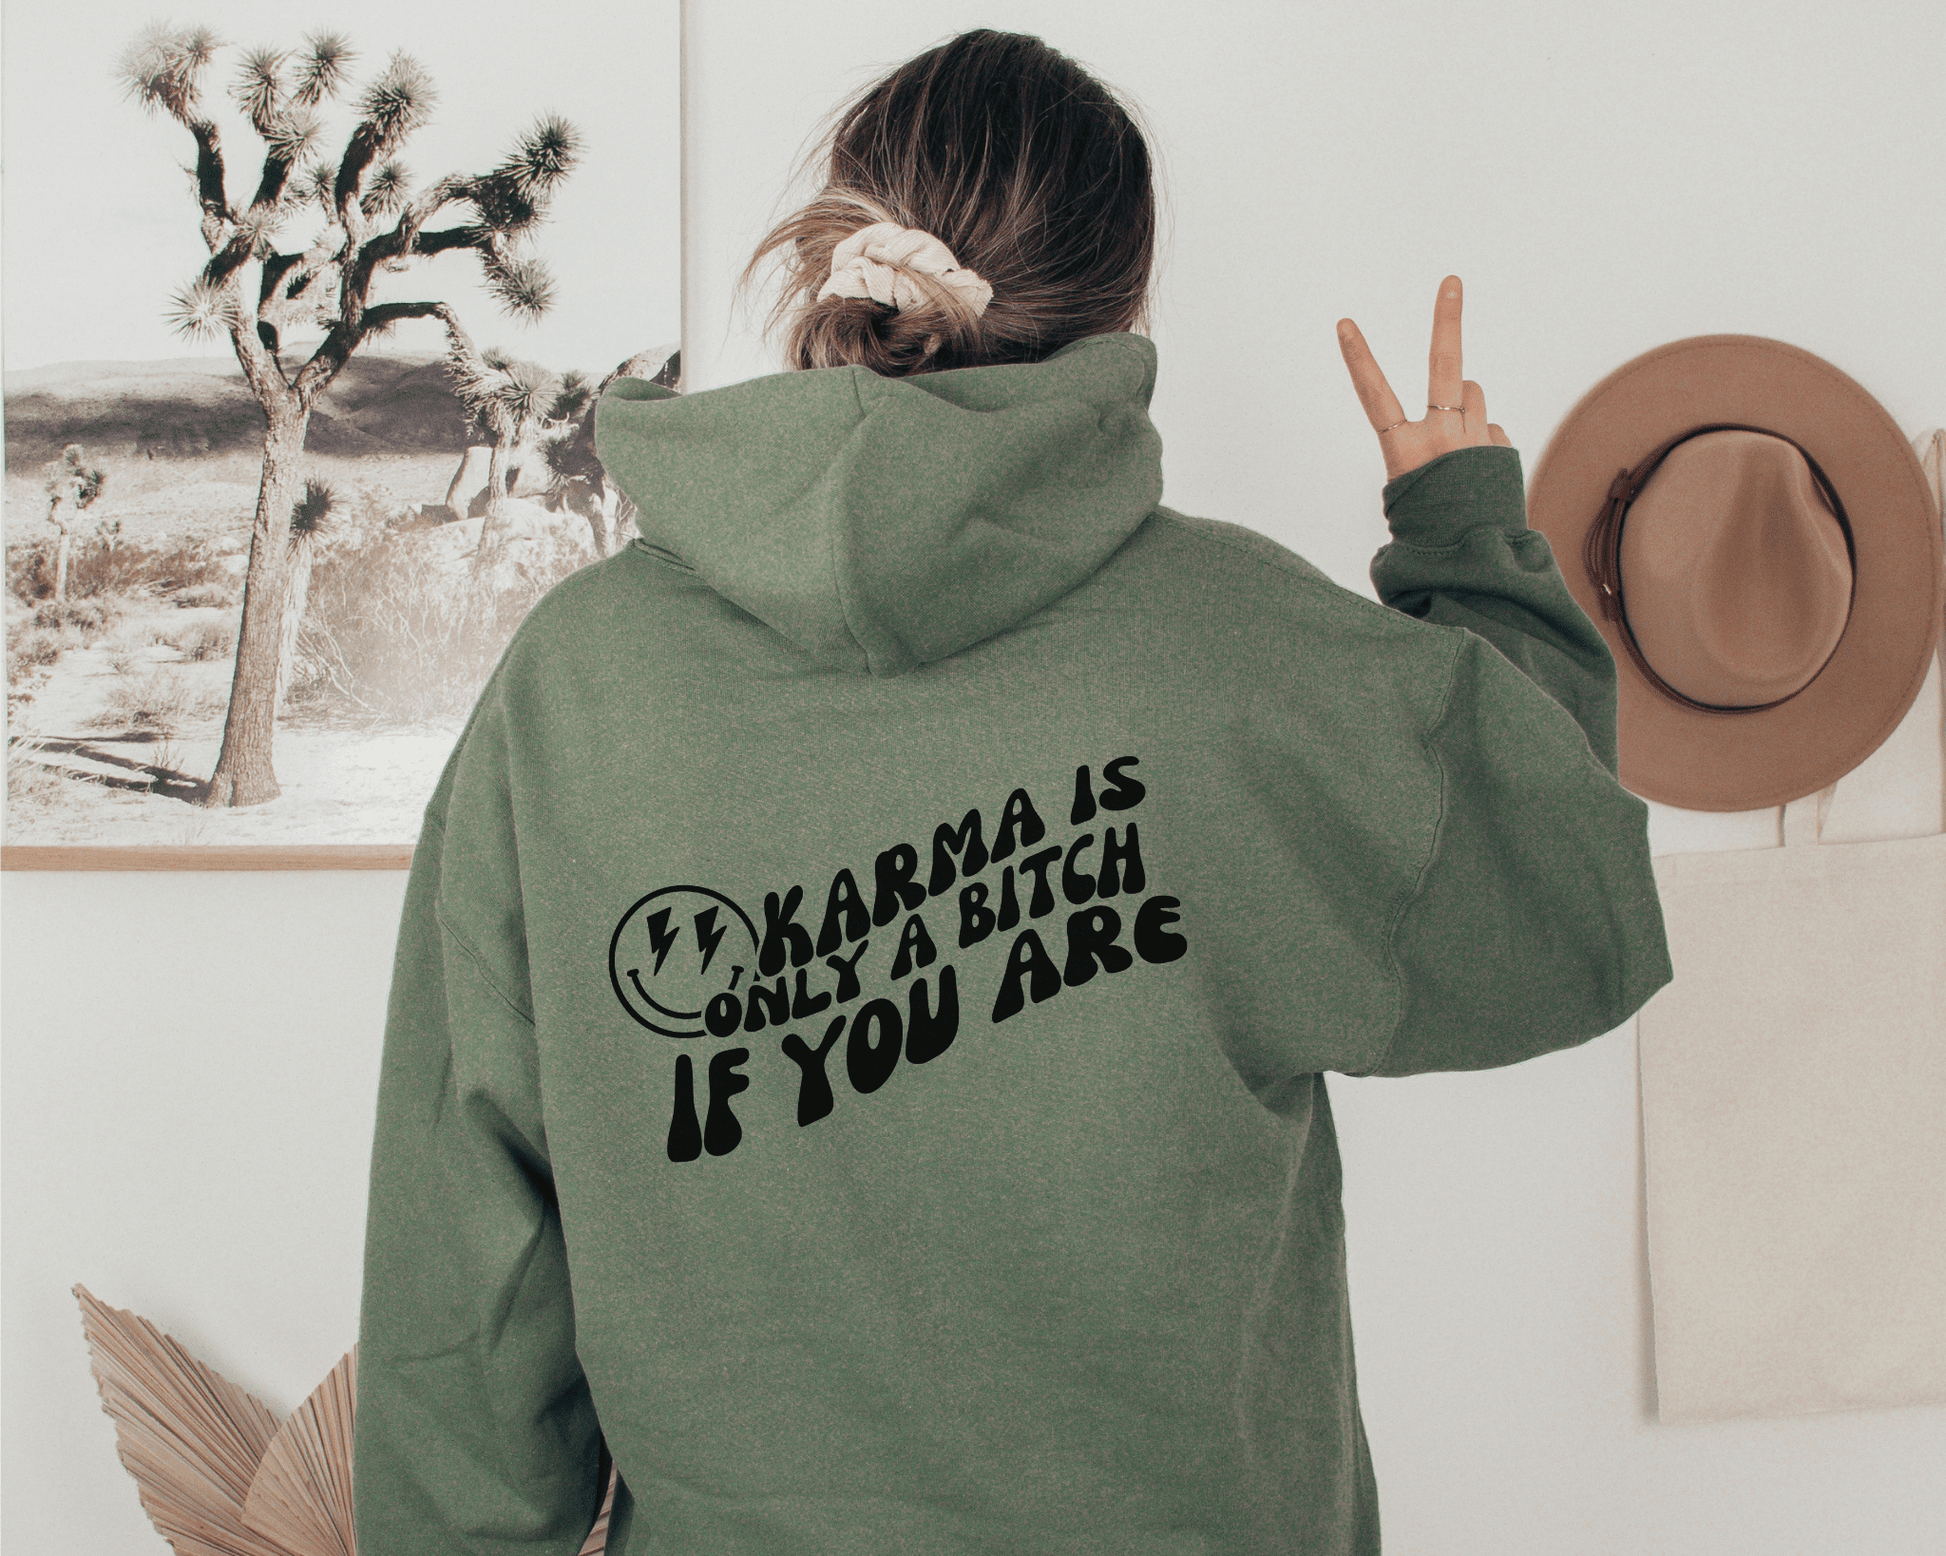 Karma is Only a Bitch if You Are hoodie in Military Green, back of hoodie.